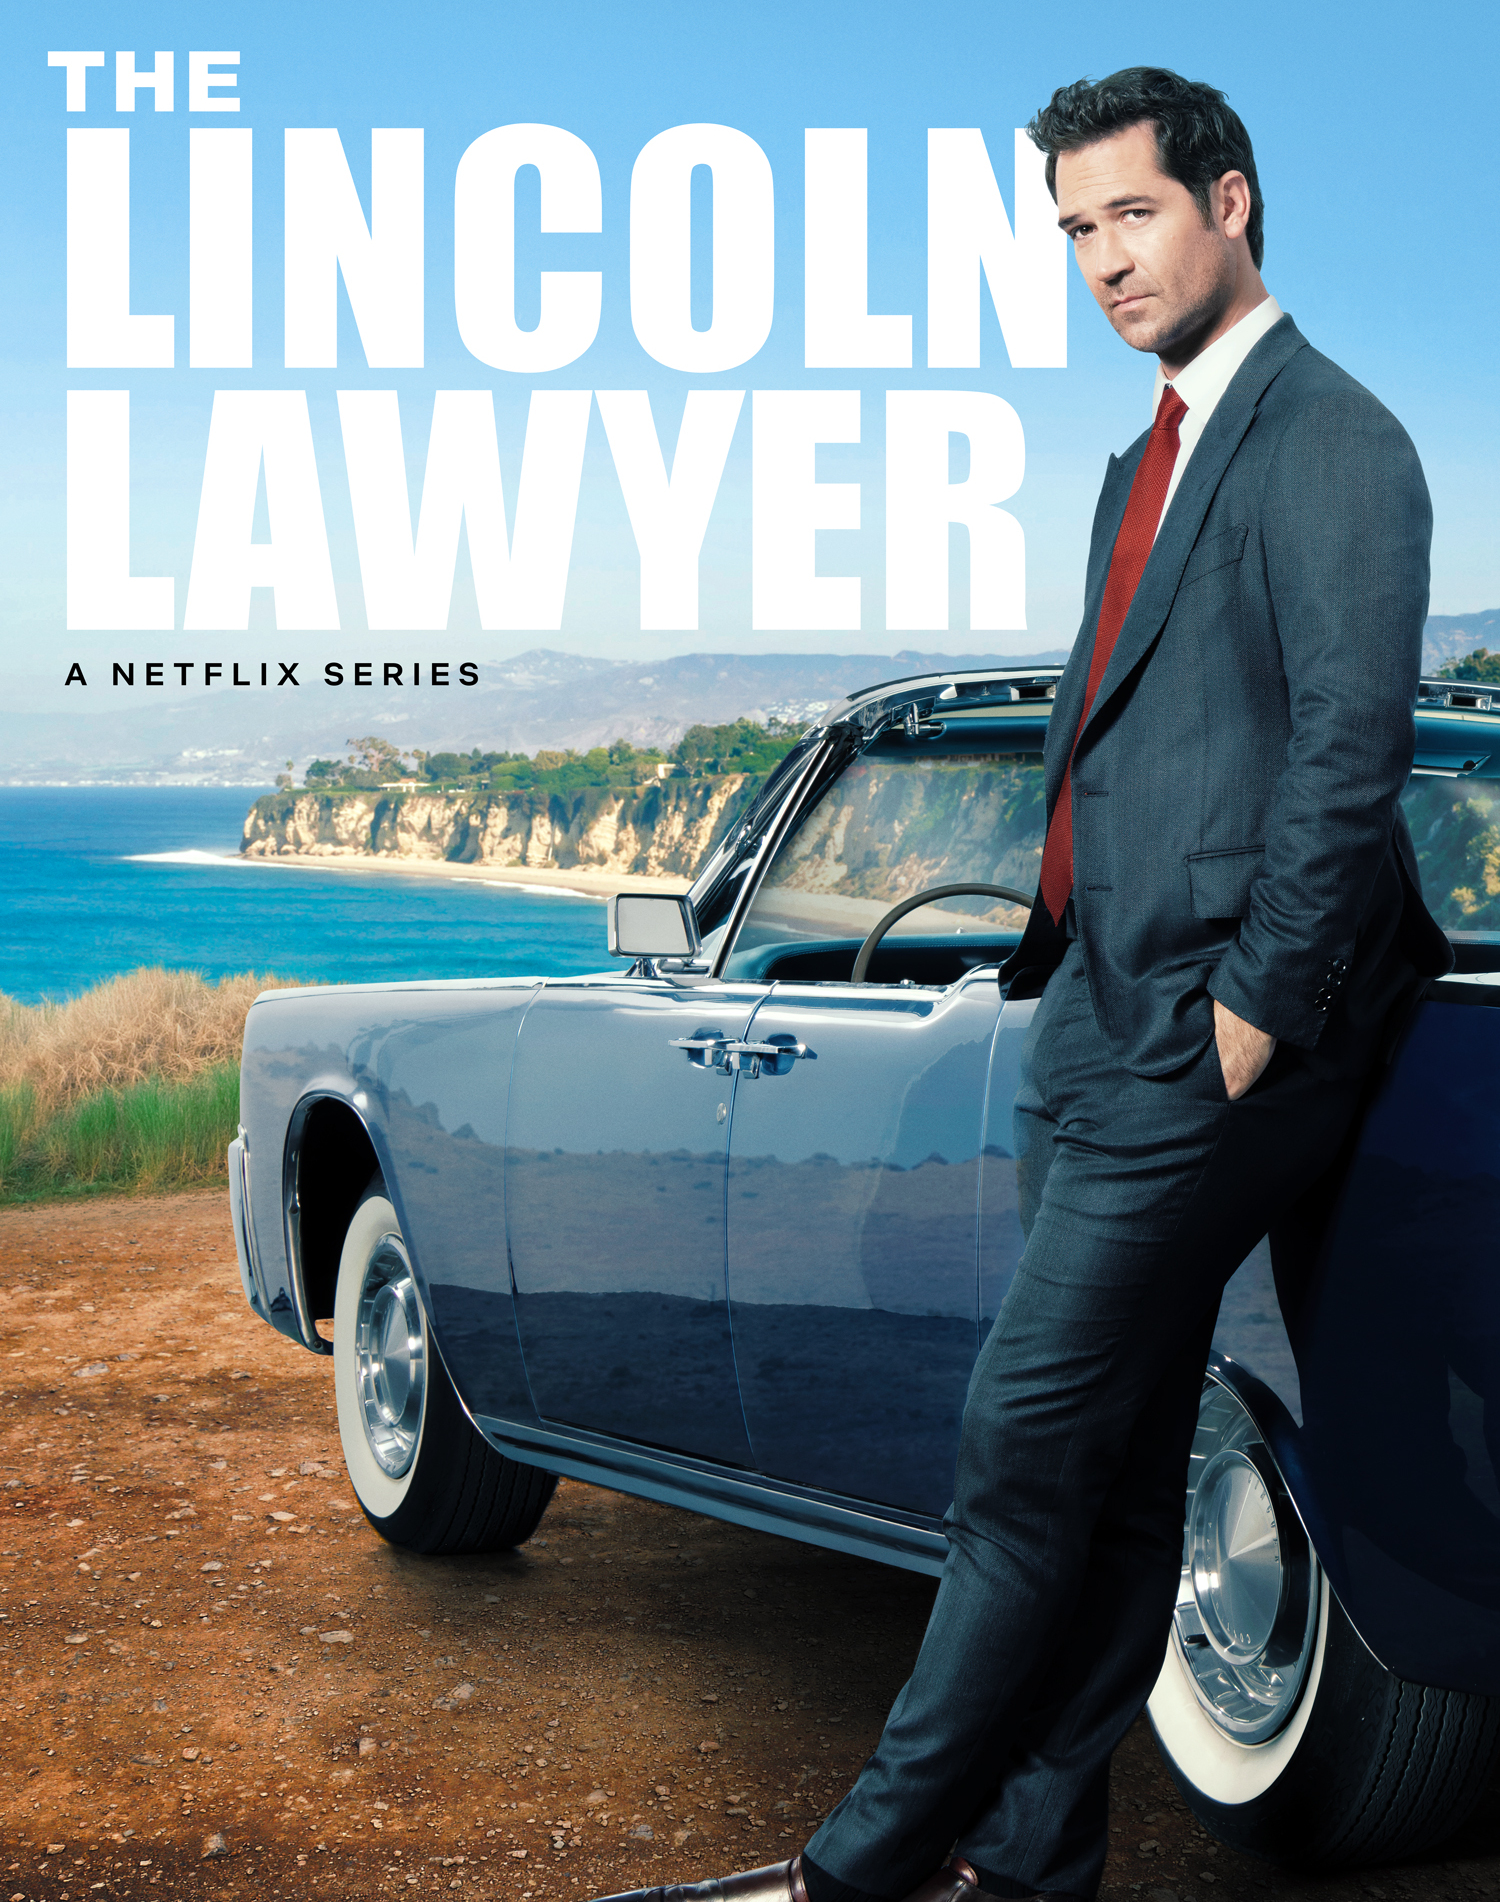 The Lincoln Lawyer Poster